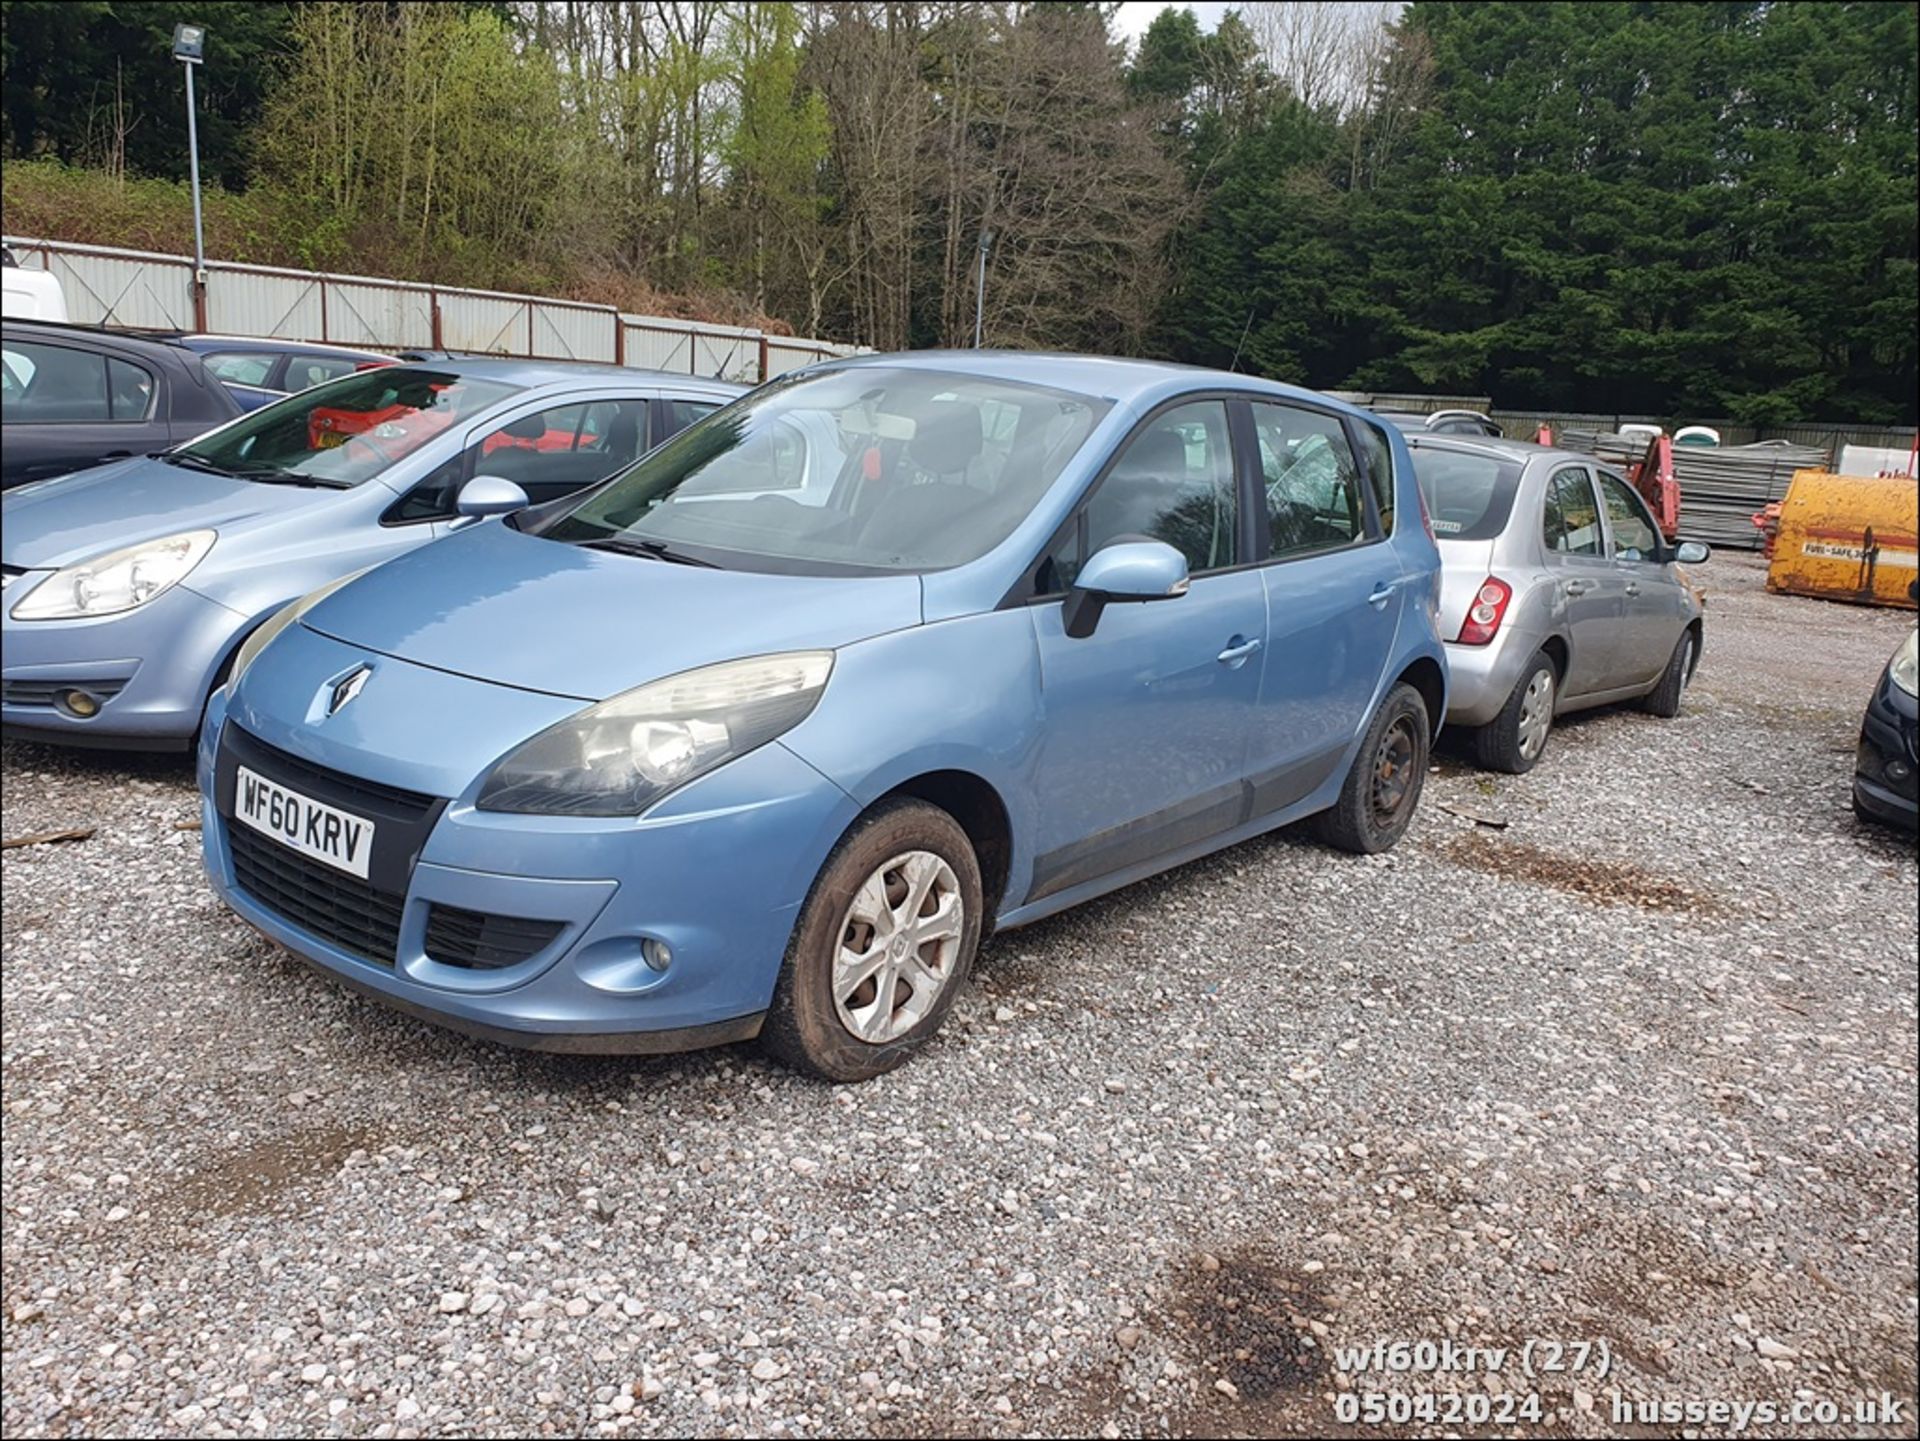 10/60 RENAULT SCENIC EXPRESSION DCI 105 - 1461cc 5dr MPV (Blue) - Image 28 of 50